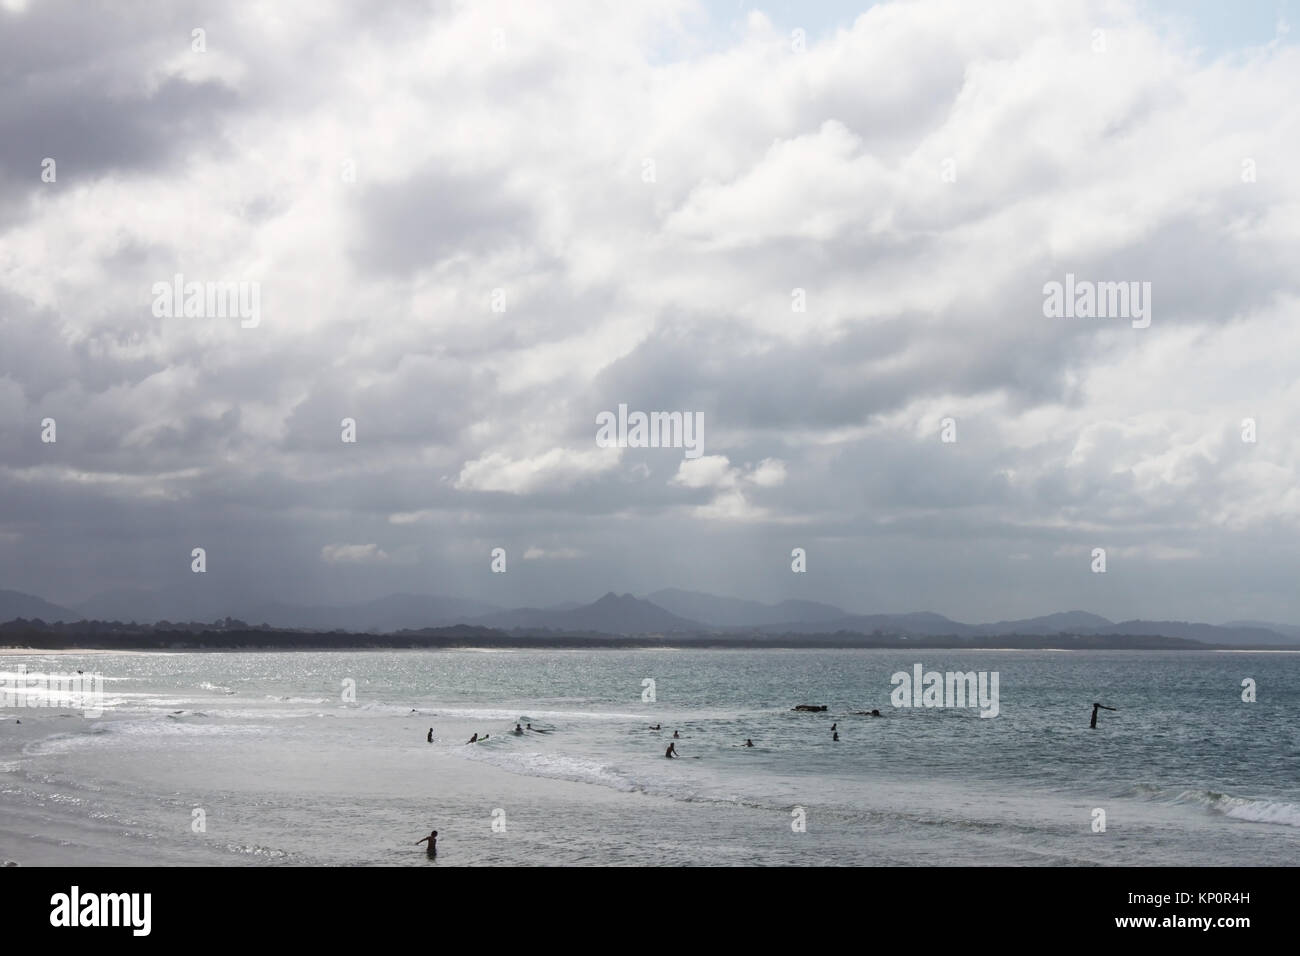 Swimmers out in grey ocean with waves on a stormy day in Byron Bay Australia Stock Photo